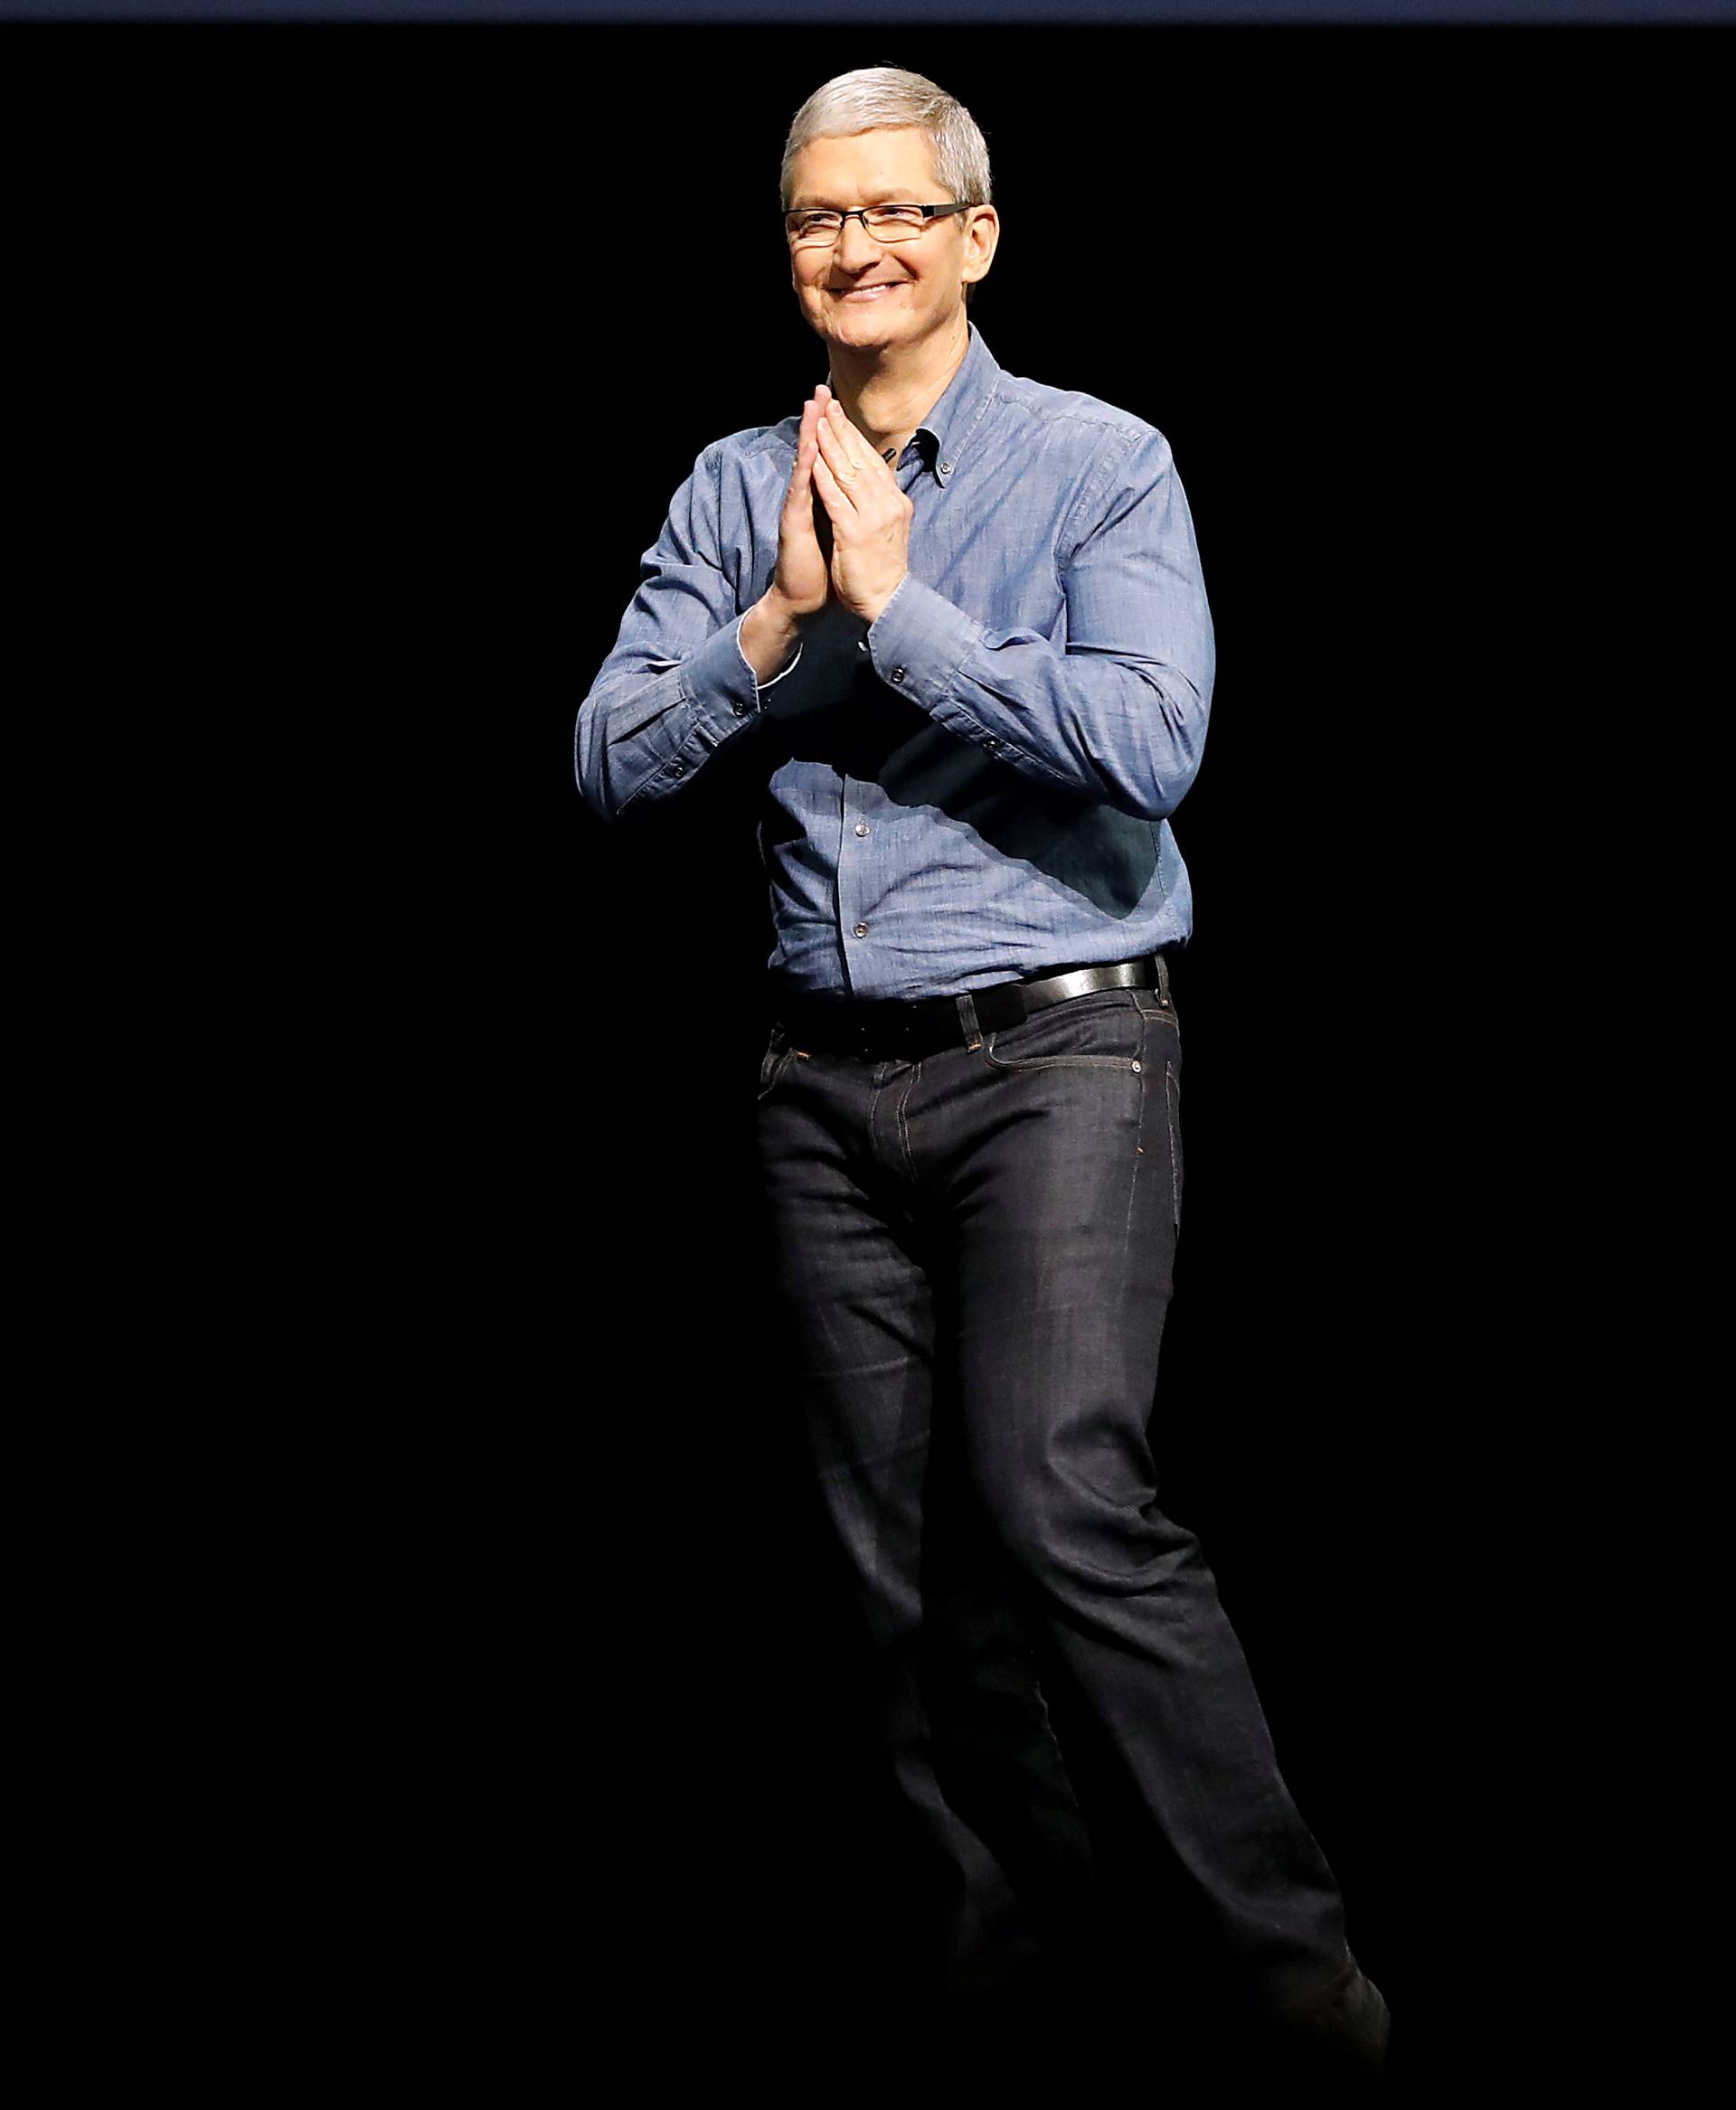 Apple Inc. CEO Tim Cook gestures to the audience as he closes the company's World Wide Developers Conference keynote in San Francisco